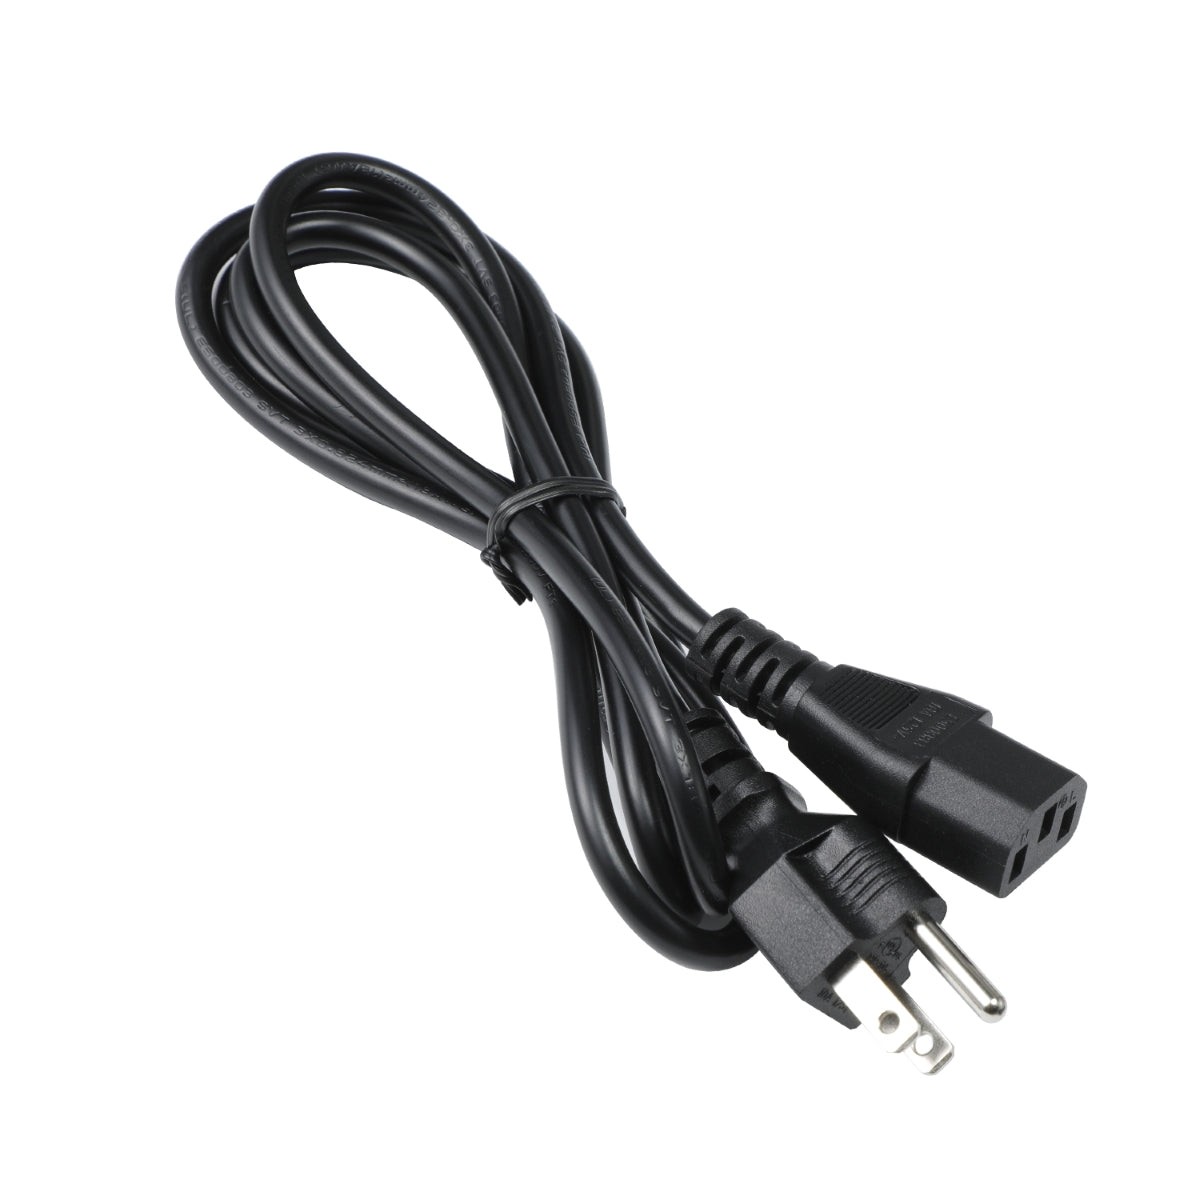 Power Cord for Dell UP2715K Monitor